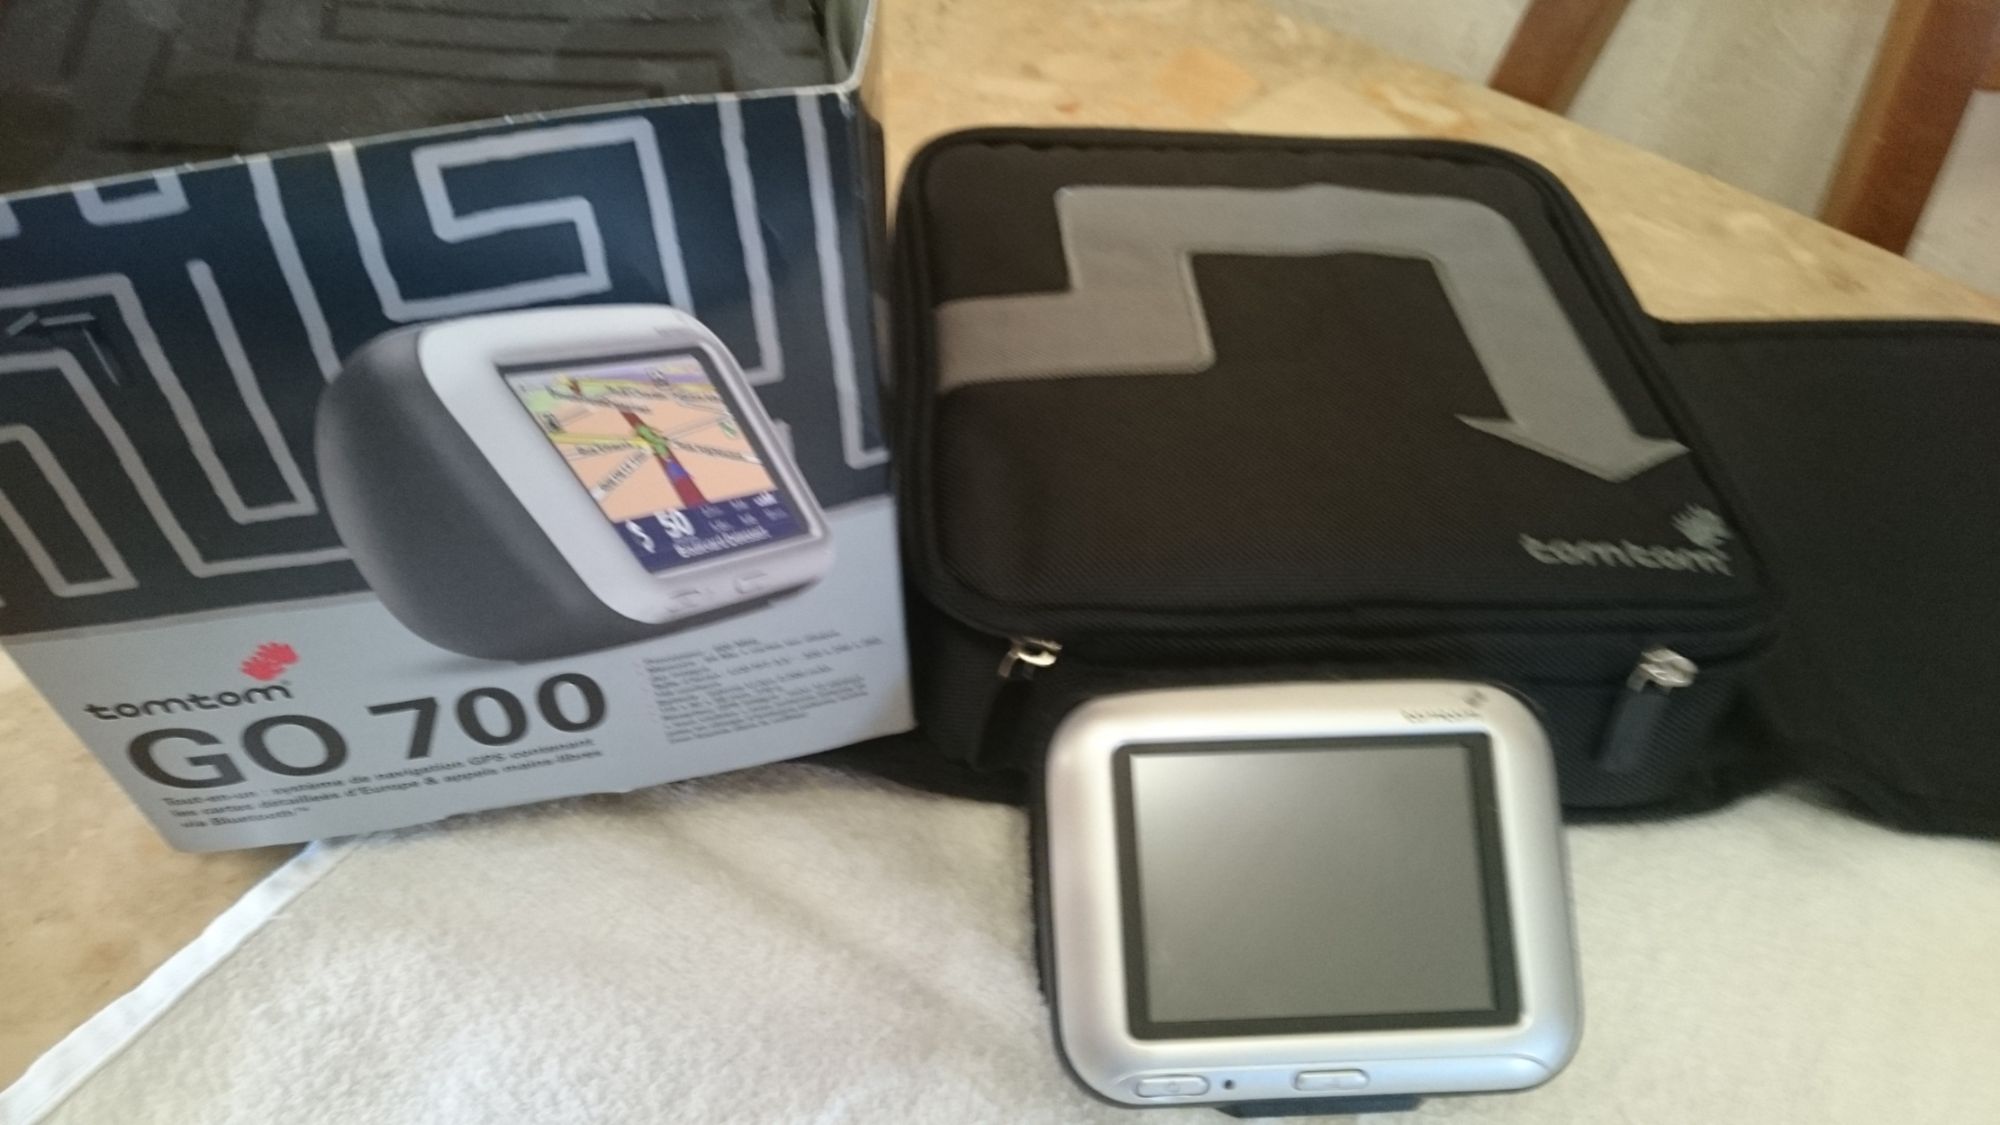 Gps tomtom 700 d'occasion  